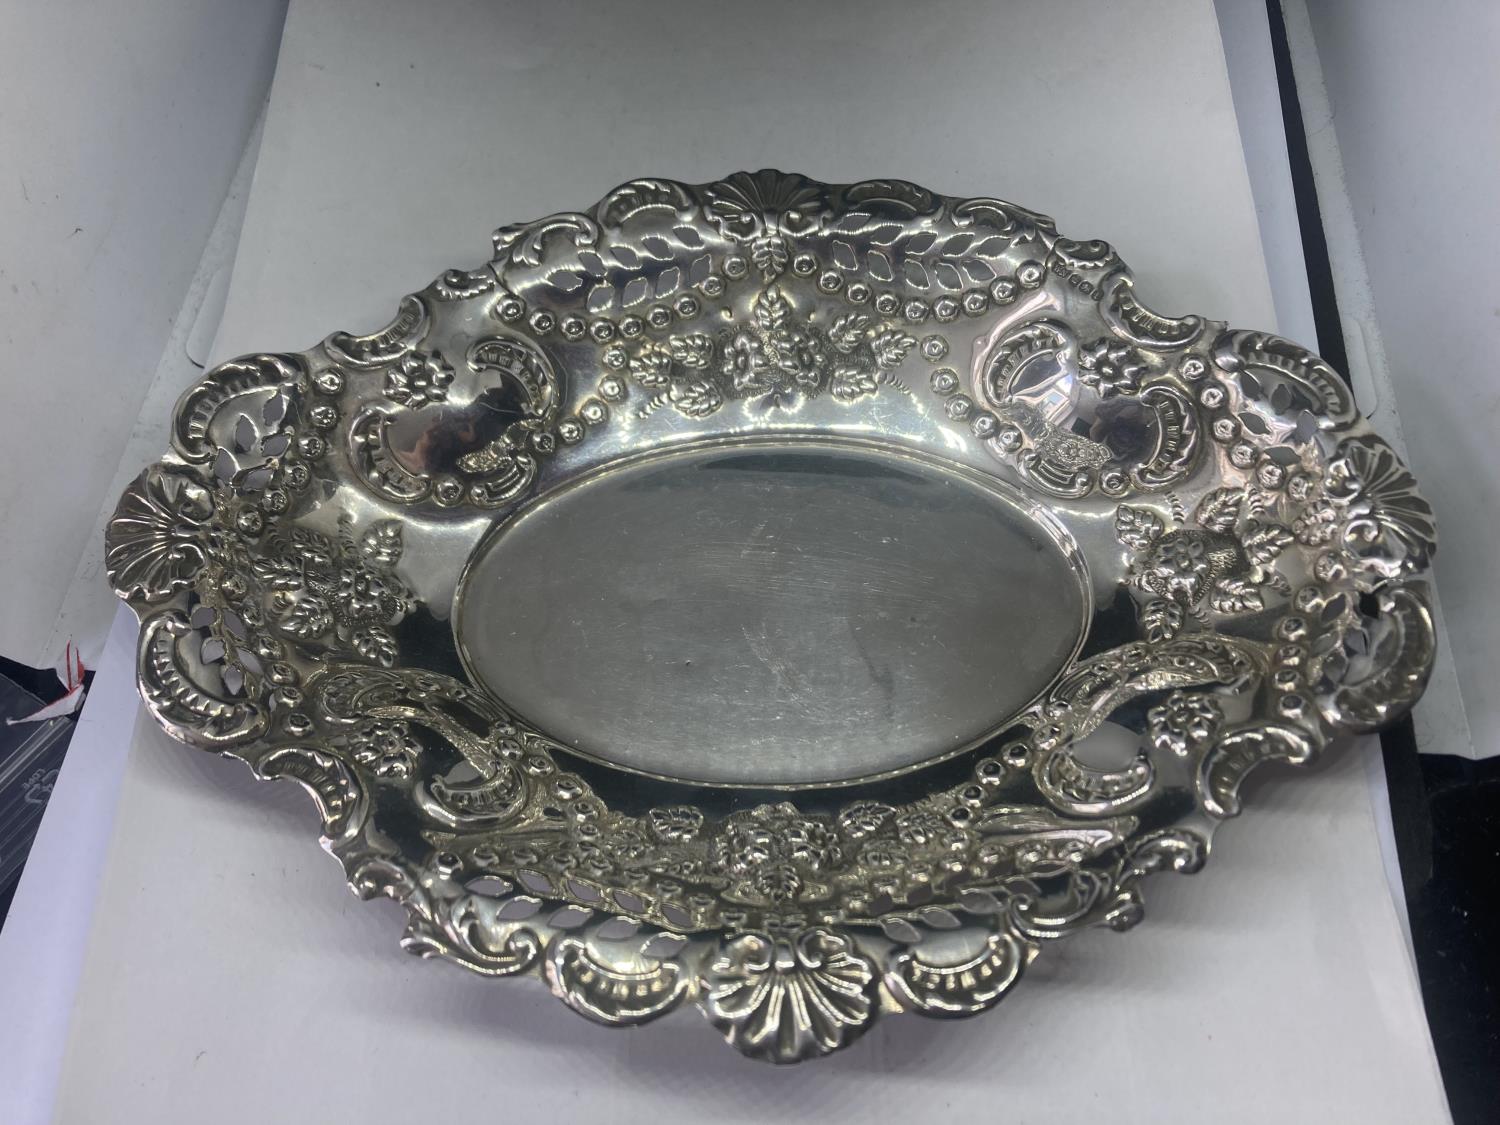 A DECORATIVE HALLMARKED SHEFFIELD SILVER DISH GROSS WEIGHT 124 GRAMS - Image 4 of 10